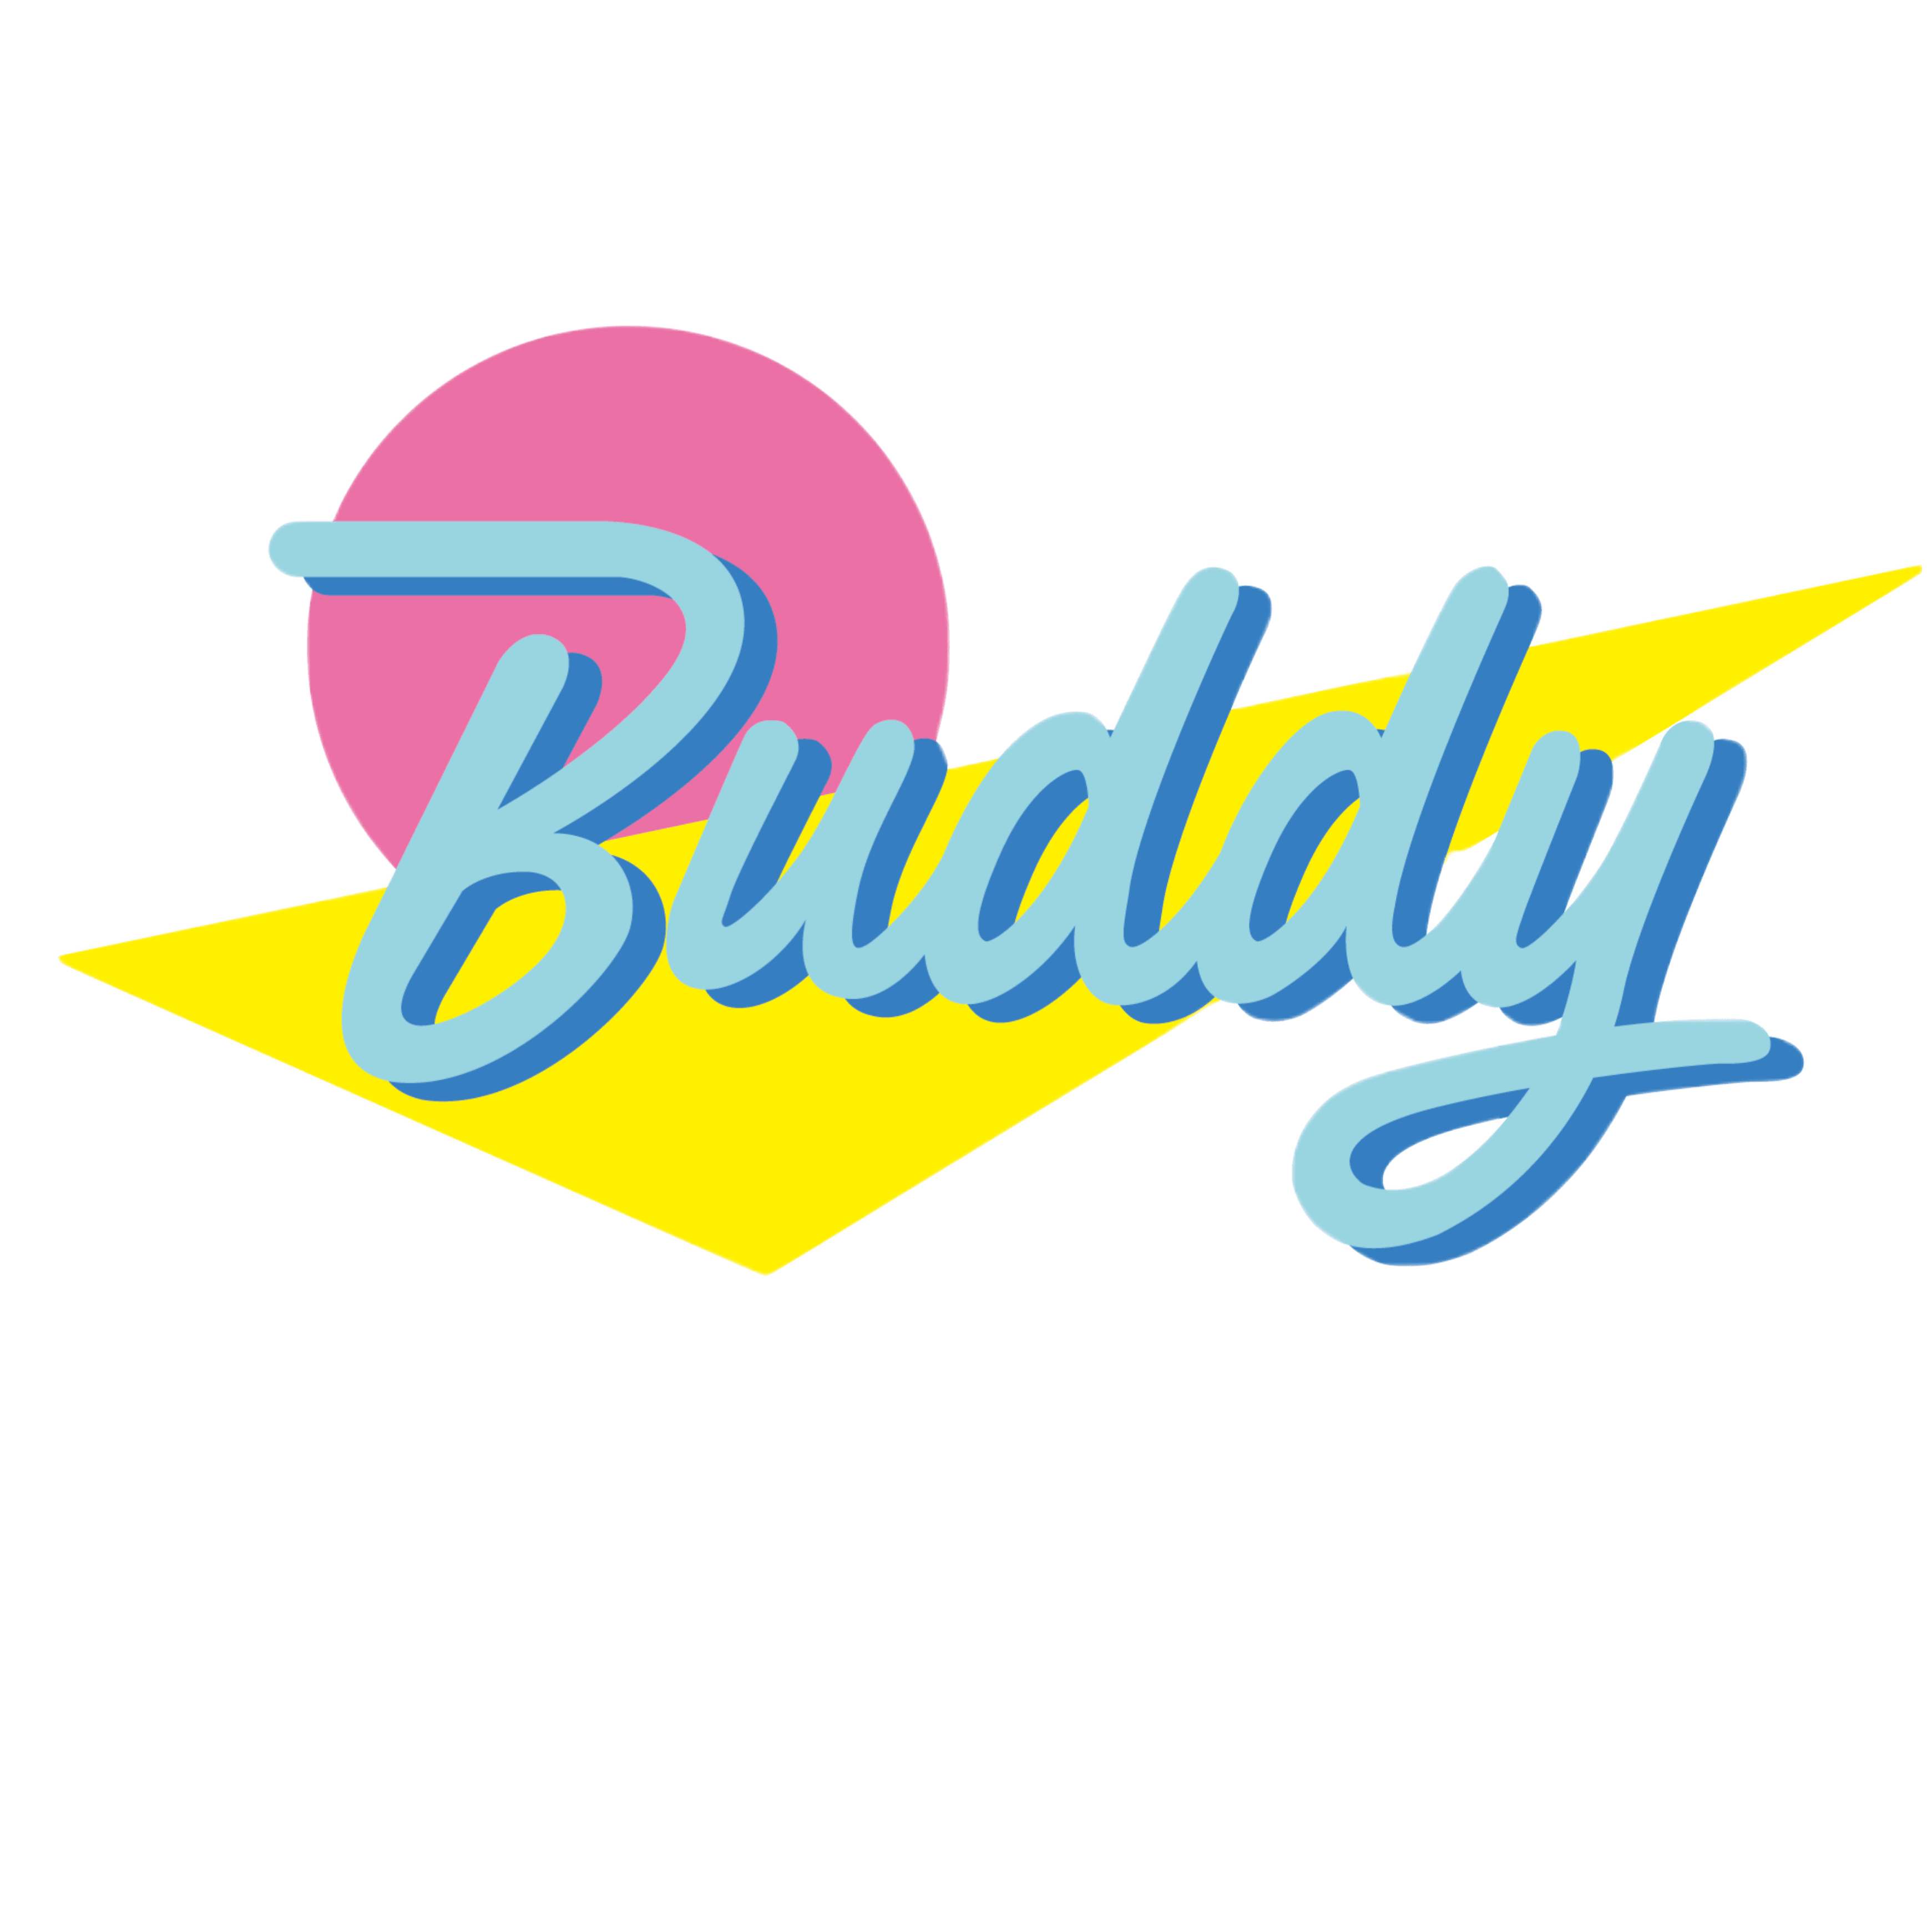 The Buddy Up Campaign - Buddy up